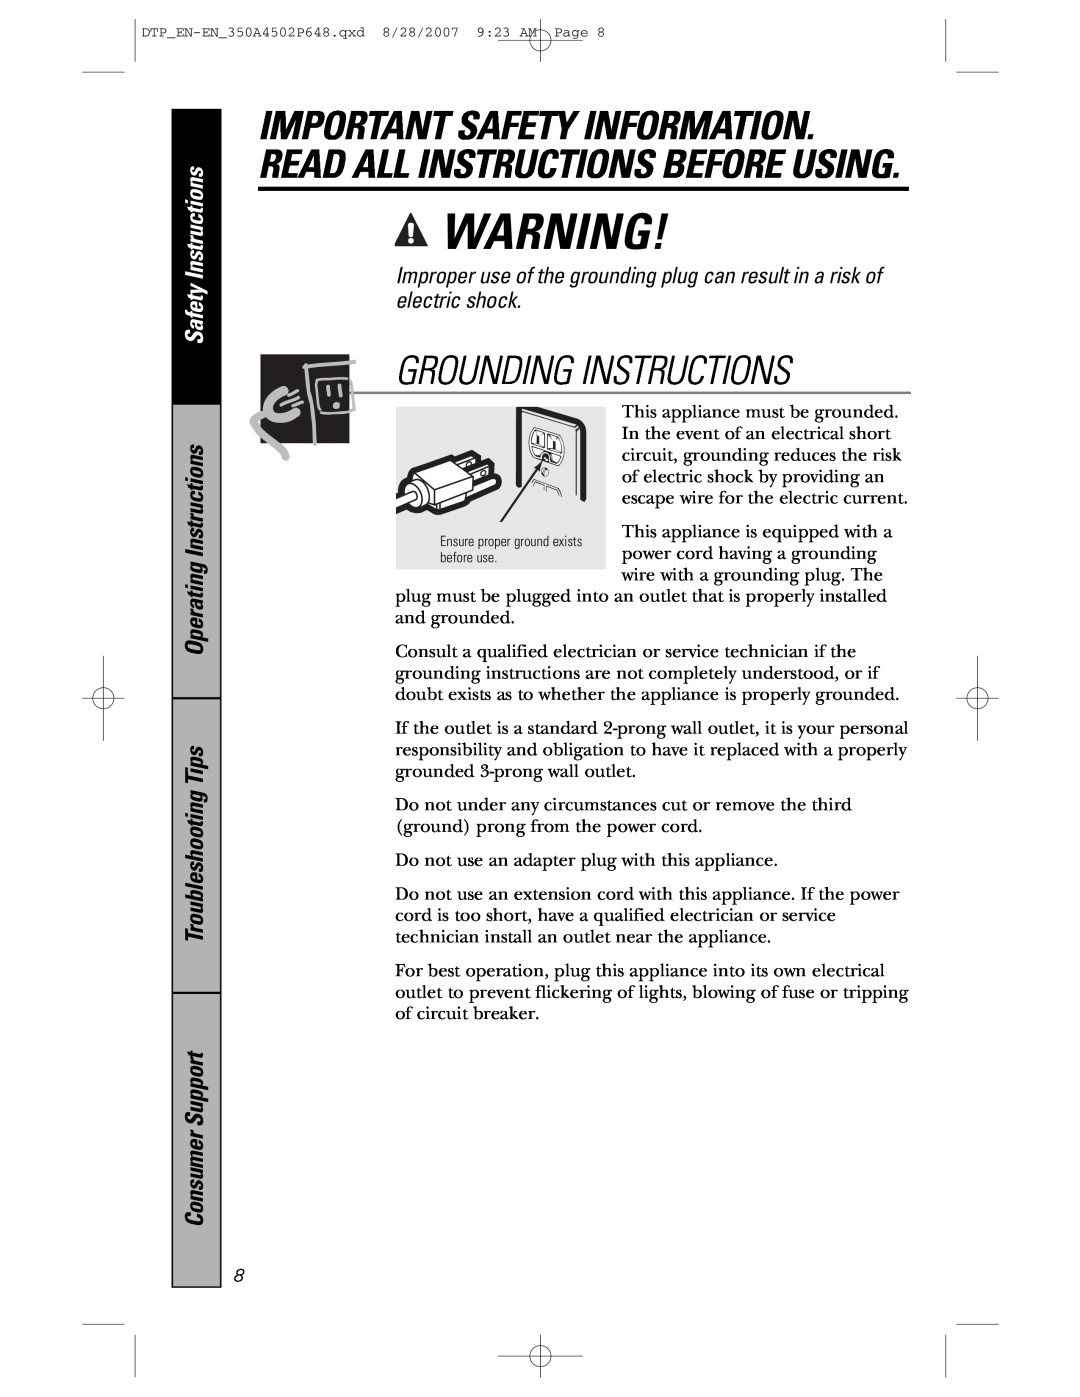 GE pvm1870 Grounding Instructions, Safety Instructions, Operating Instructions Troubleshooting Tips, Consumer Support 